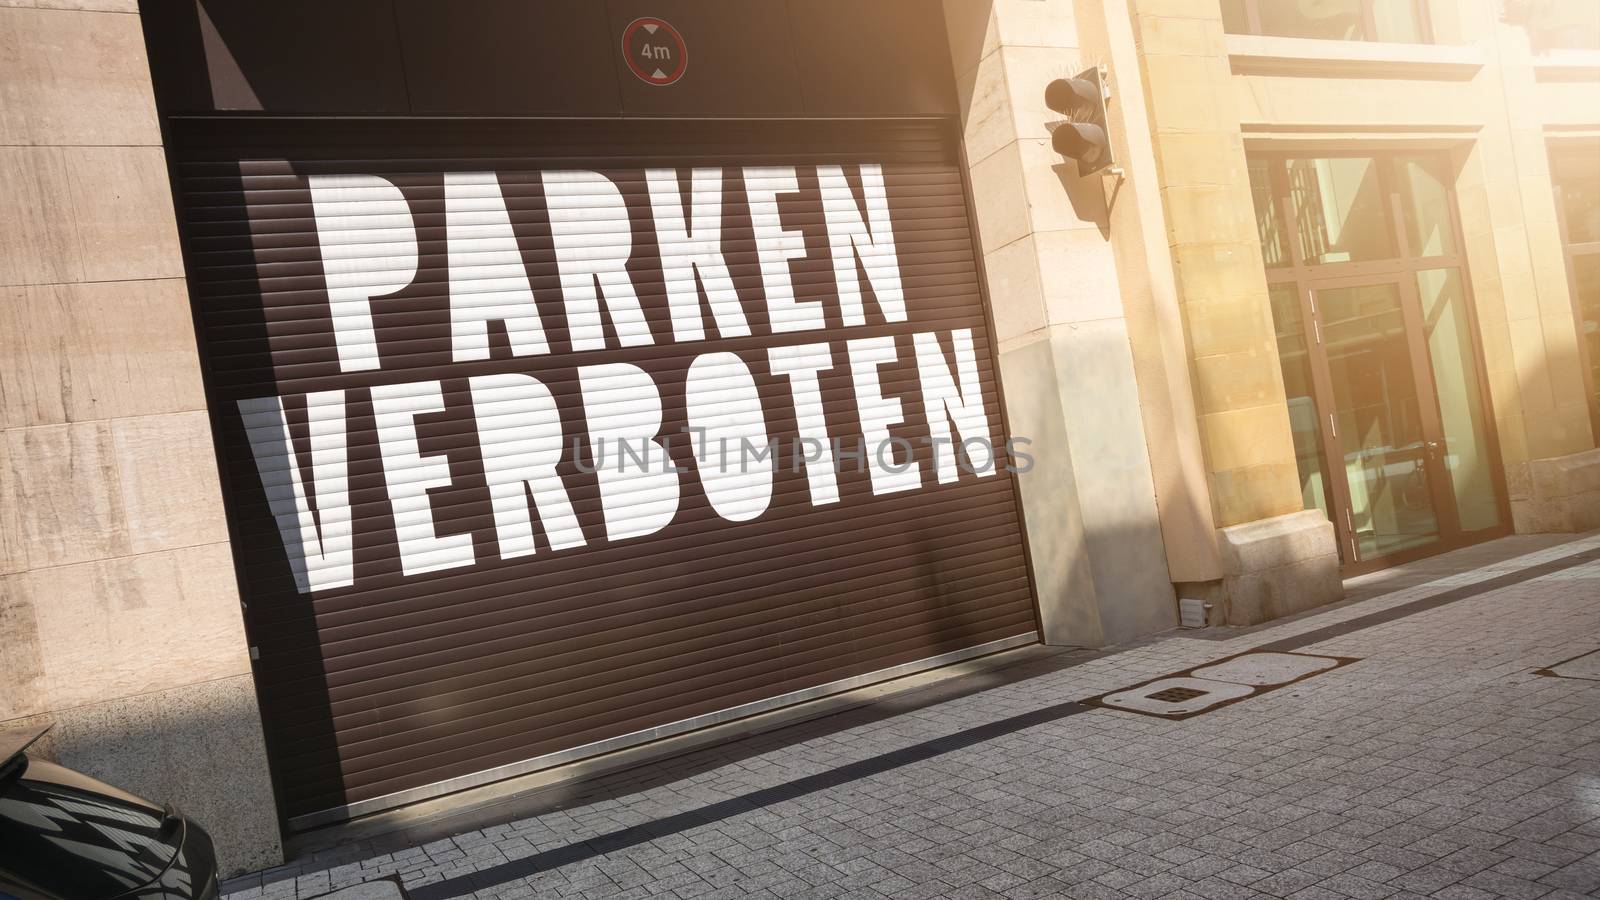 An image of the text parking forbidden in german language on a garage door